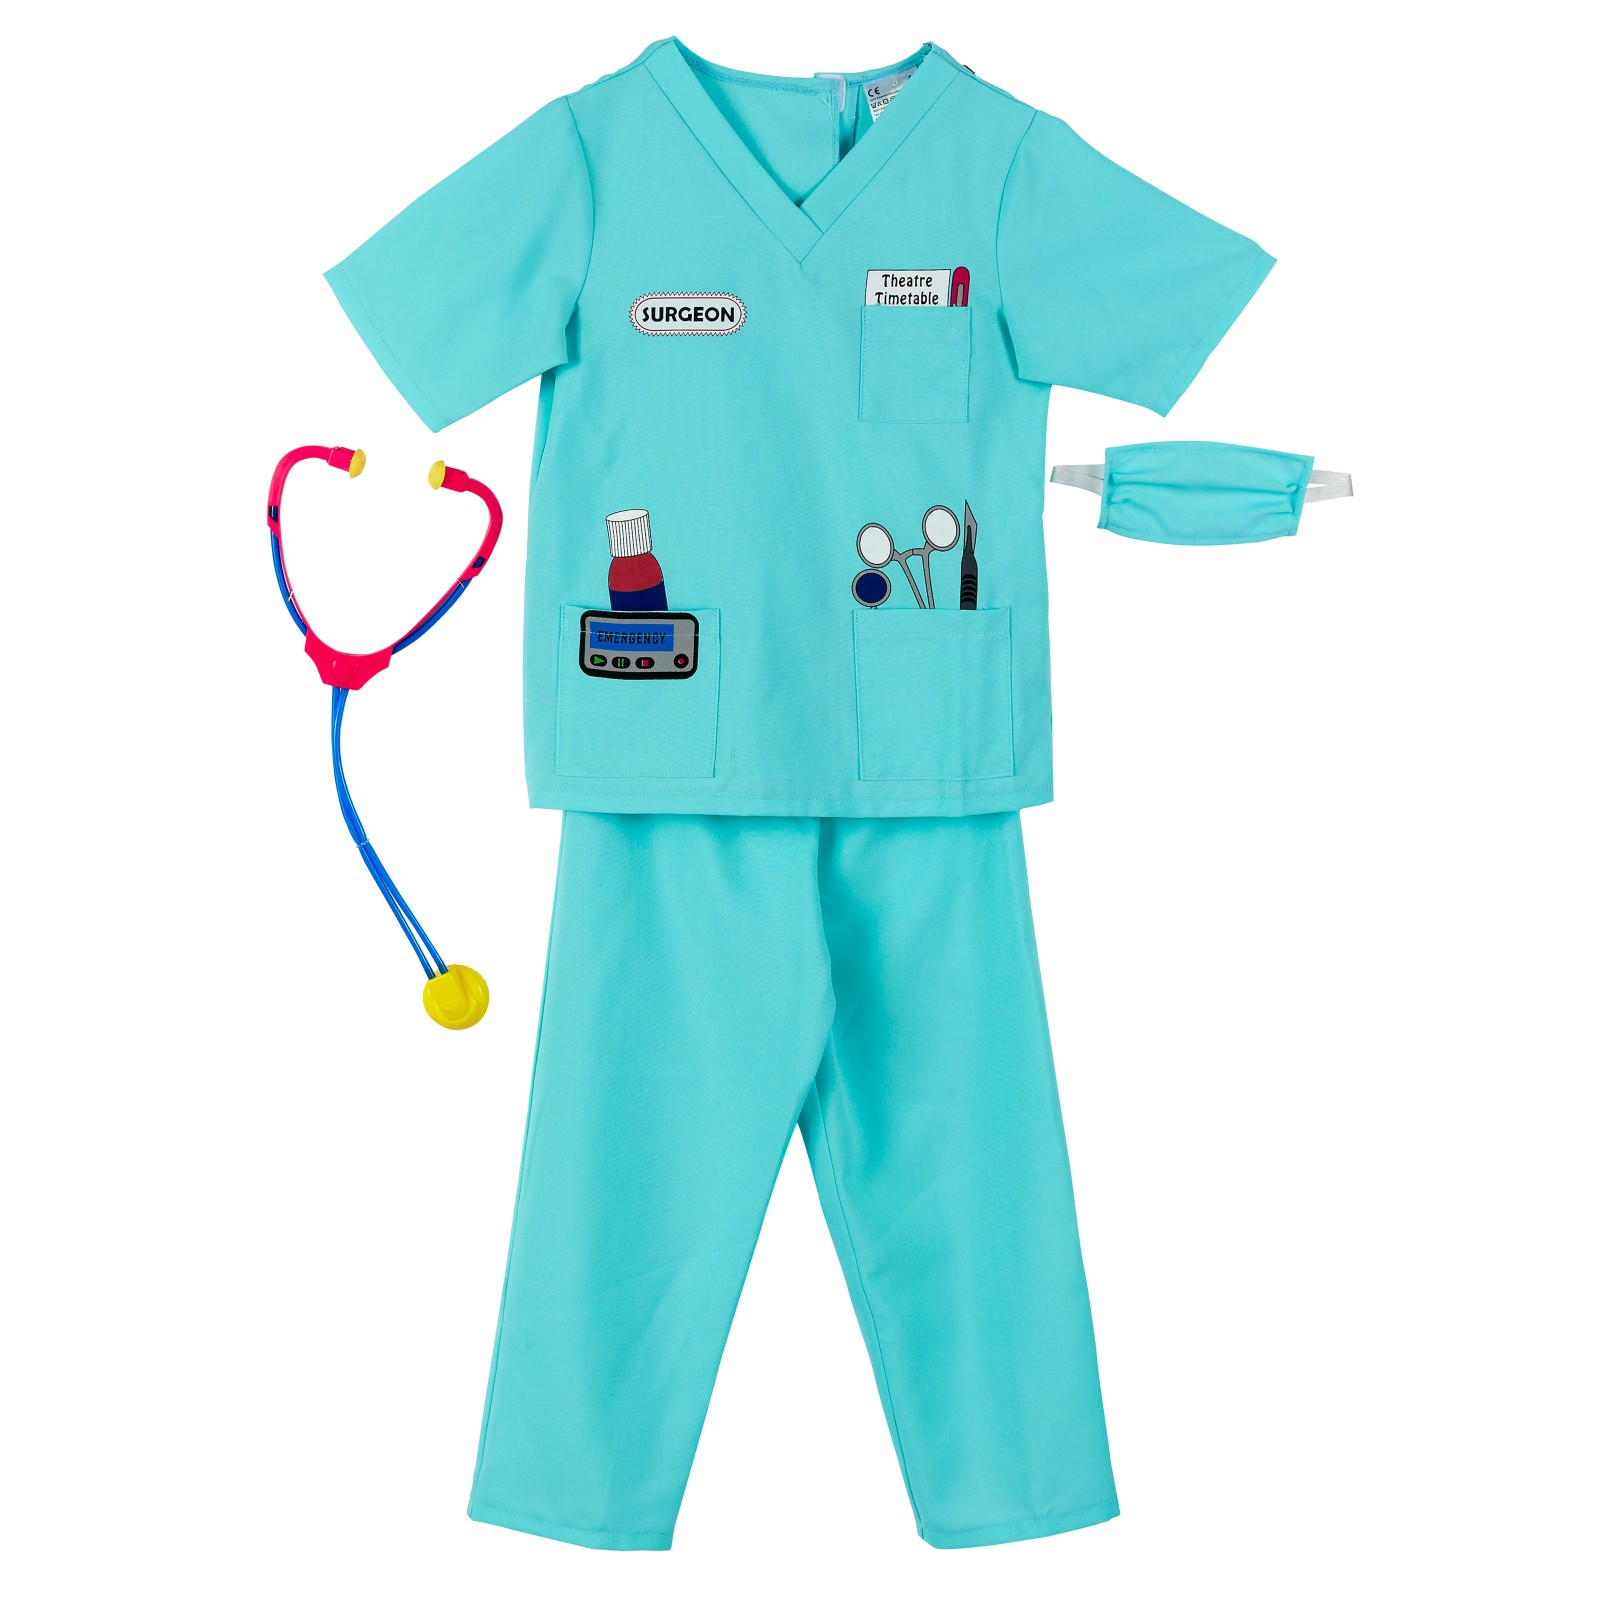 doctor clipart clothing